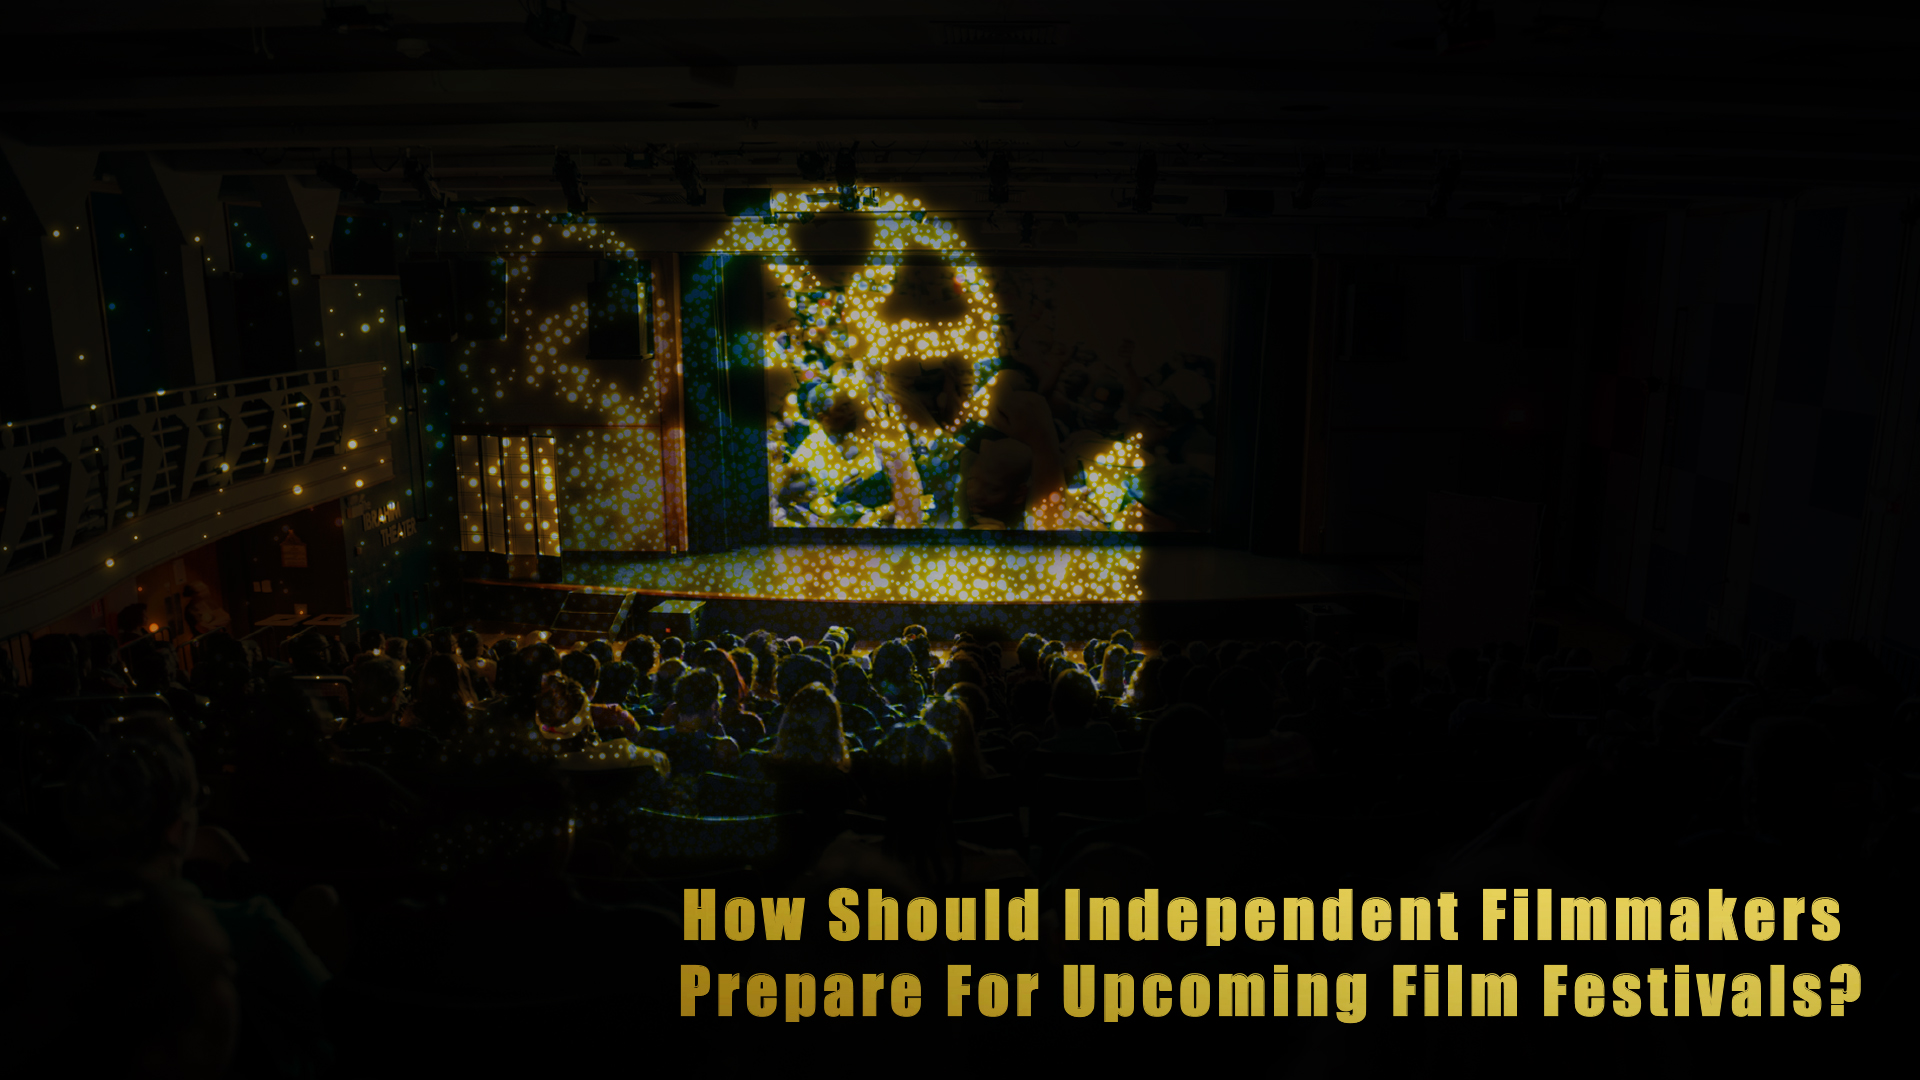 How should independent filmmakers prepare for upcoming film festivals?